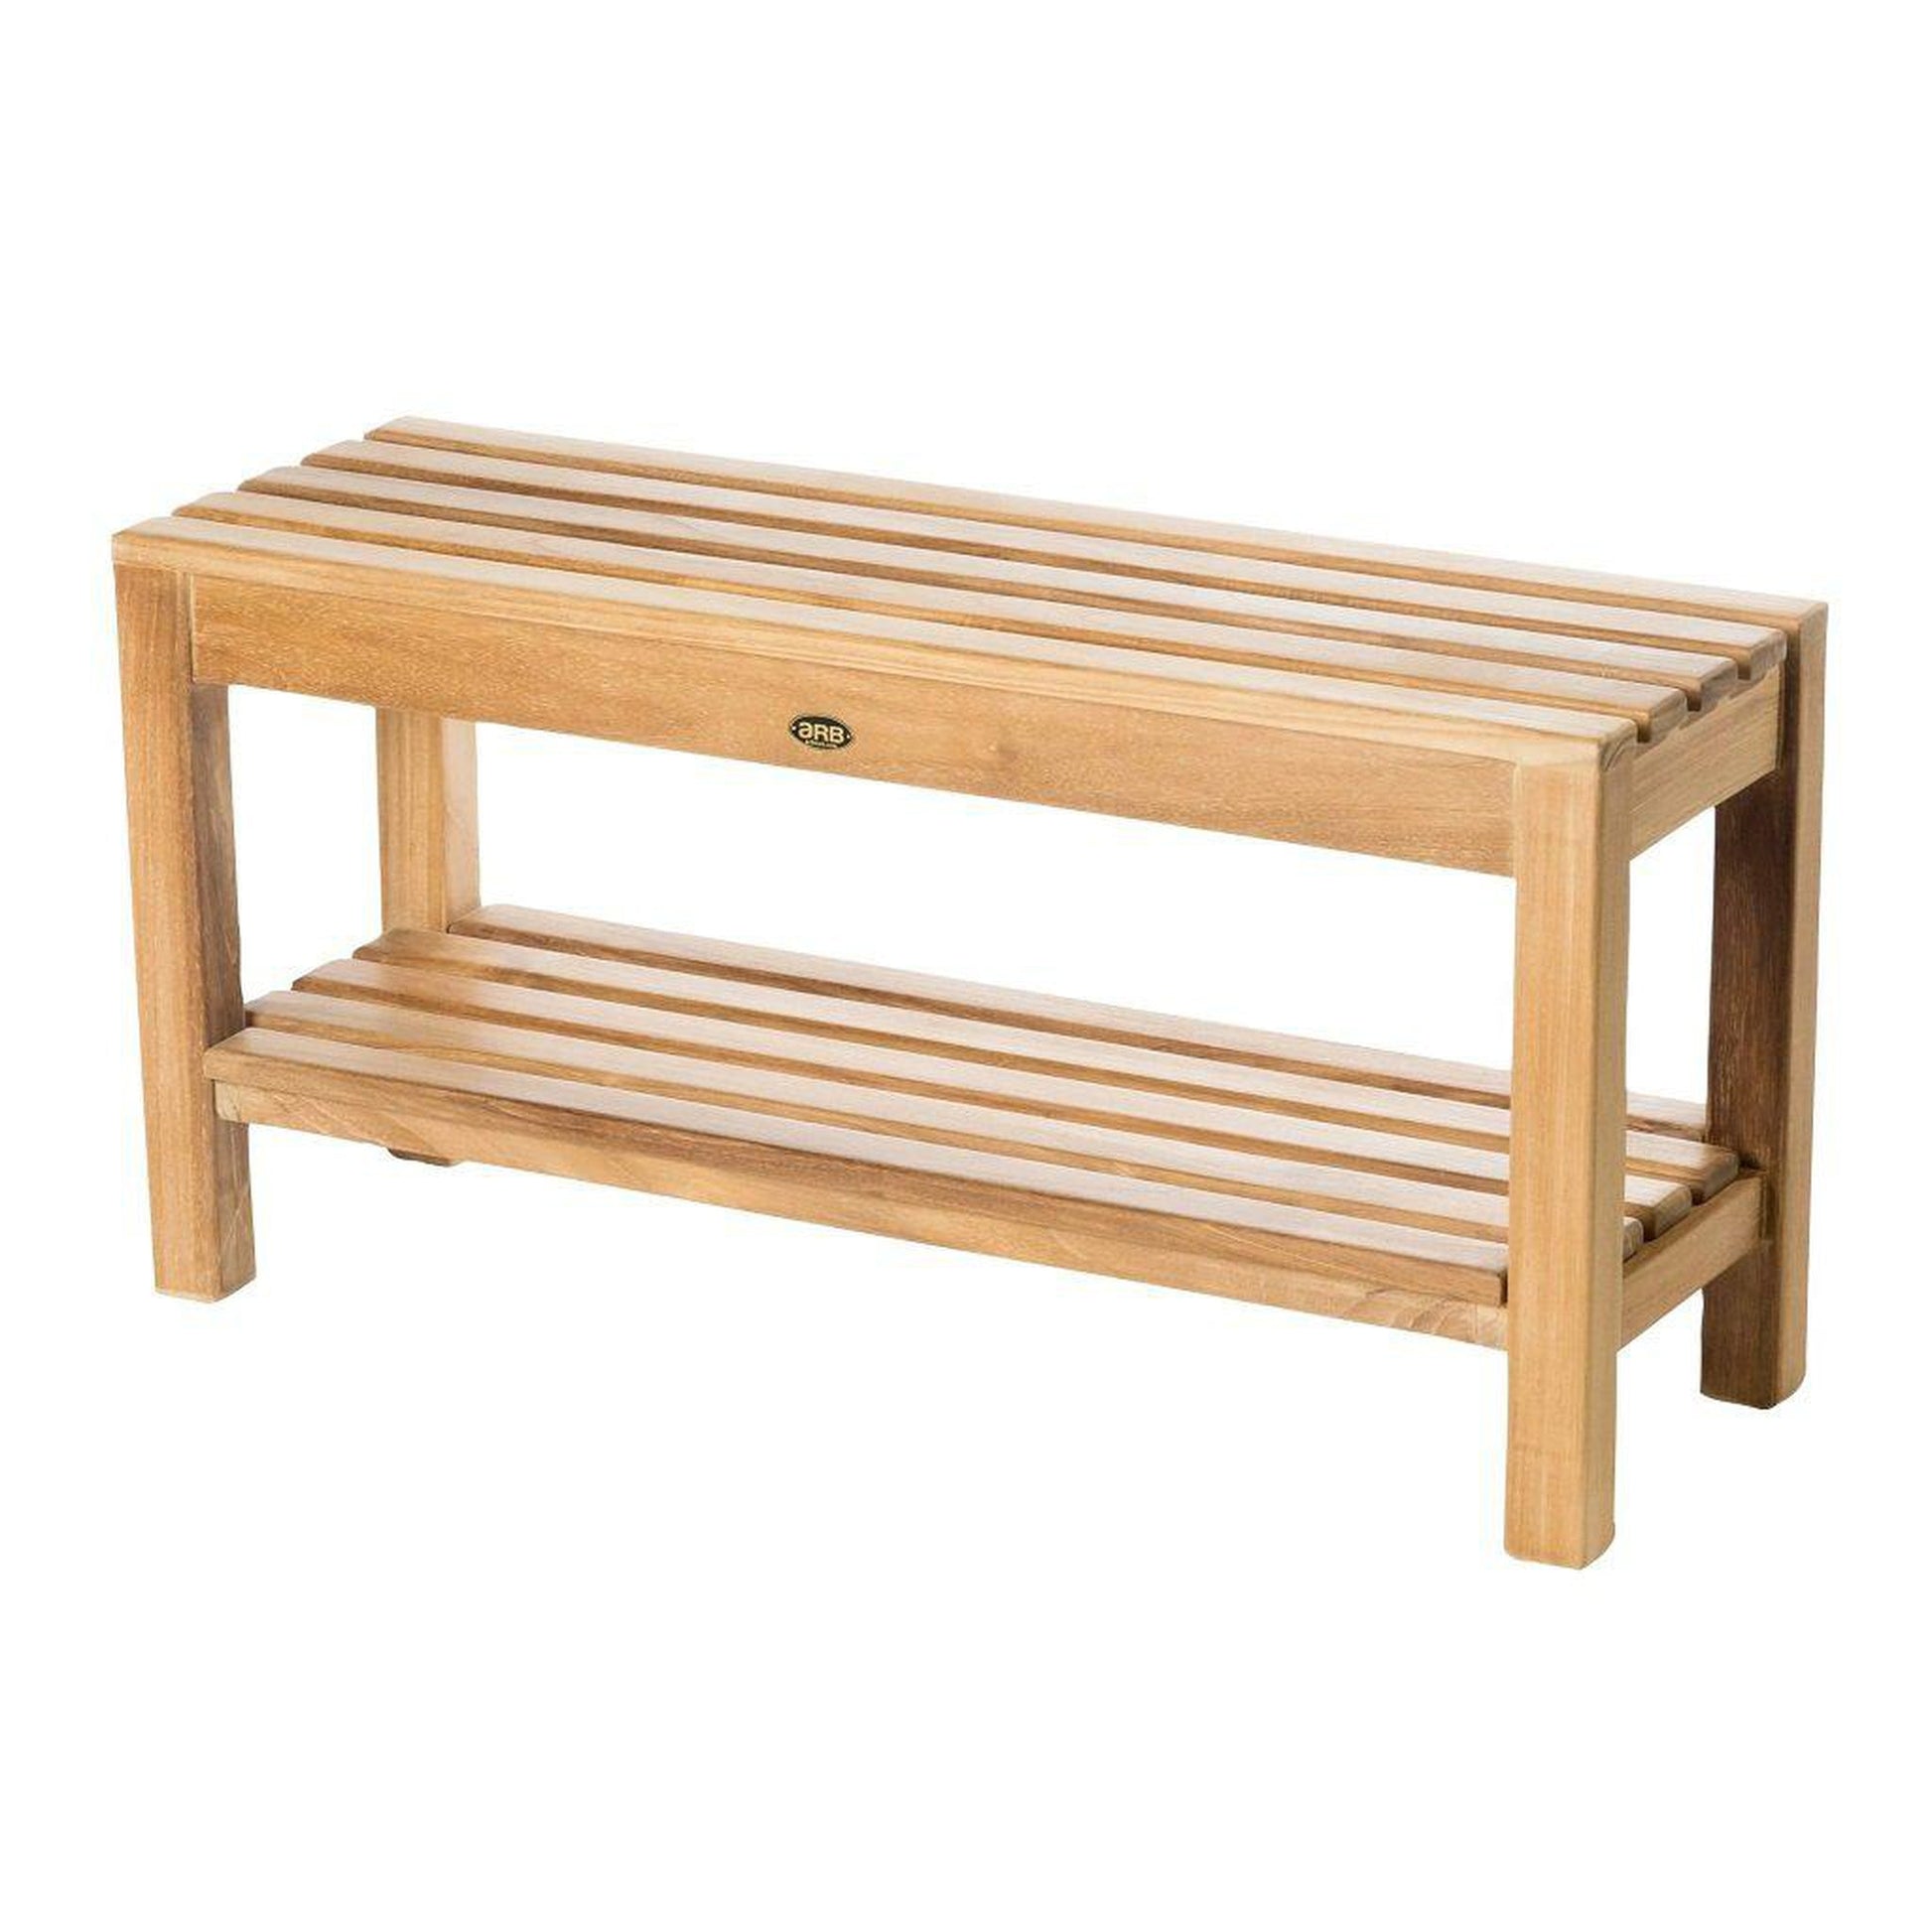 ARB Teak & Specialties Coach 36" Solid Teak Wood Shower Bench With Removable Shelf